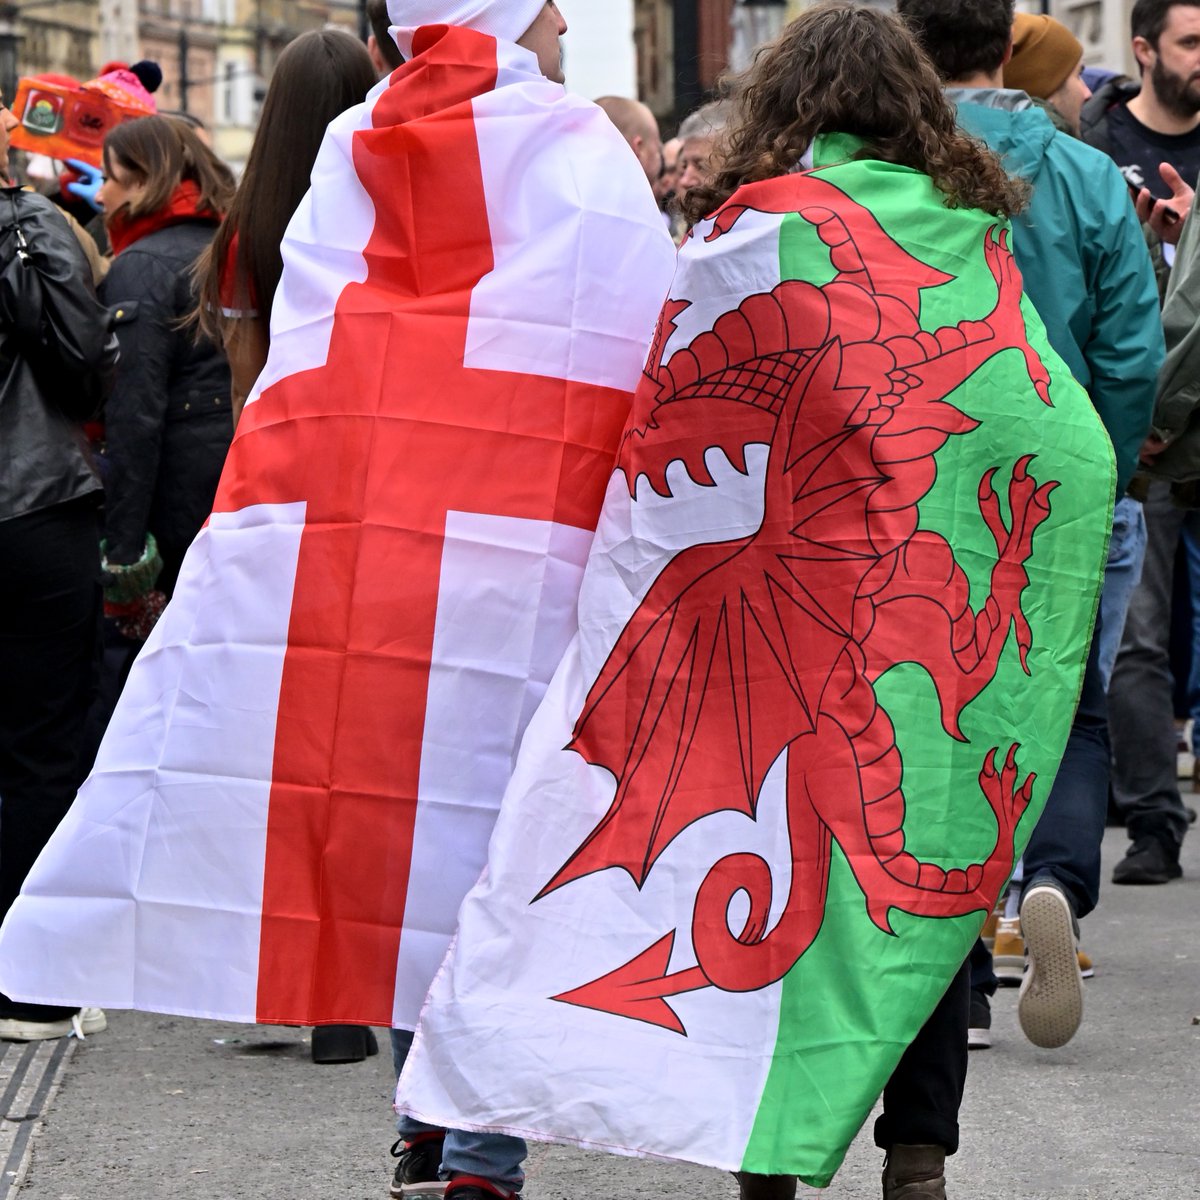 Dydd Sain Siôr Hapus – A very Happy St George’s Day to our closest neighbours and our English friends all over the world 🏴󠁧󠁢󠁷󠁬󠁳󠁿🏴󠁧󠁢󠁥󠁮󠁧󠁿 We hope you have a fantastic day, however you choose to celebrate 🙌